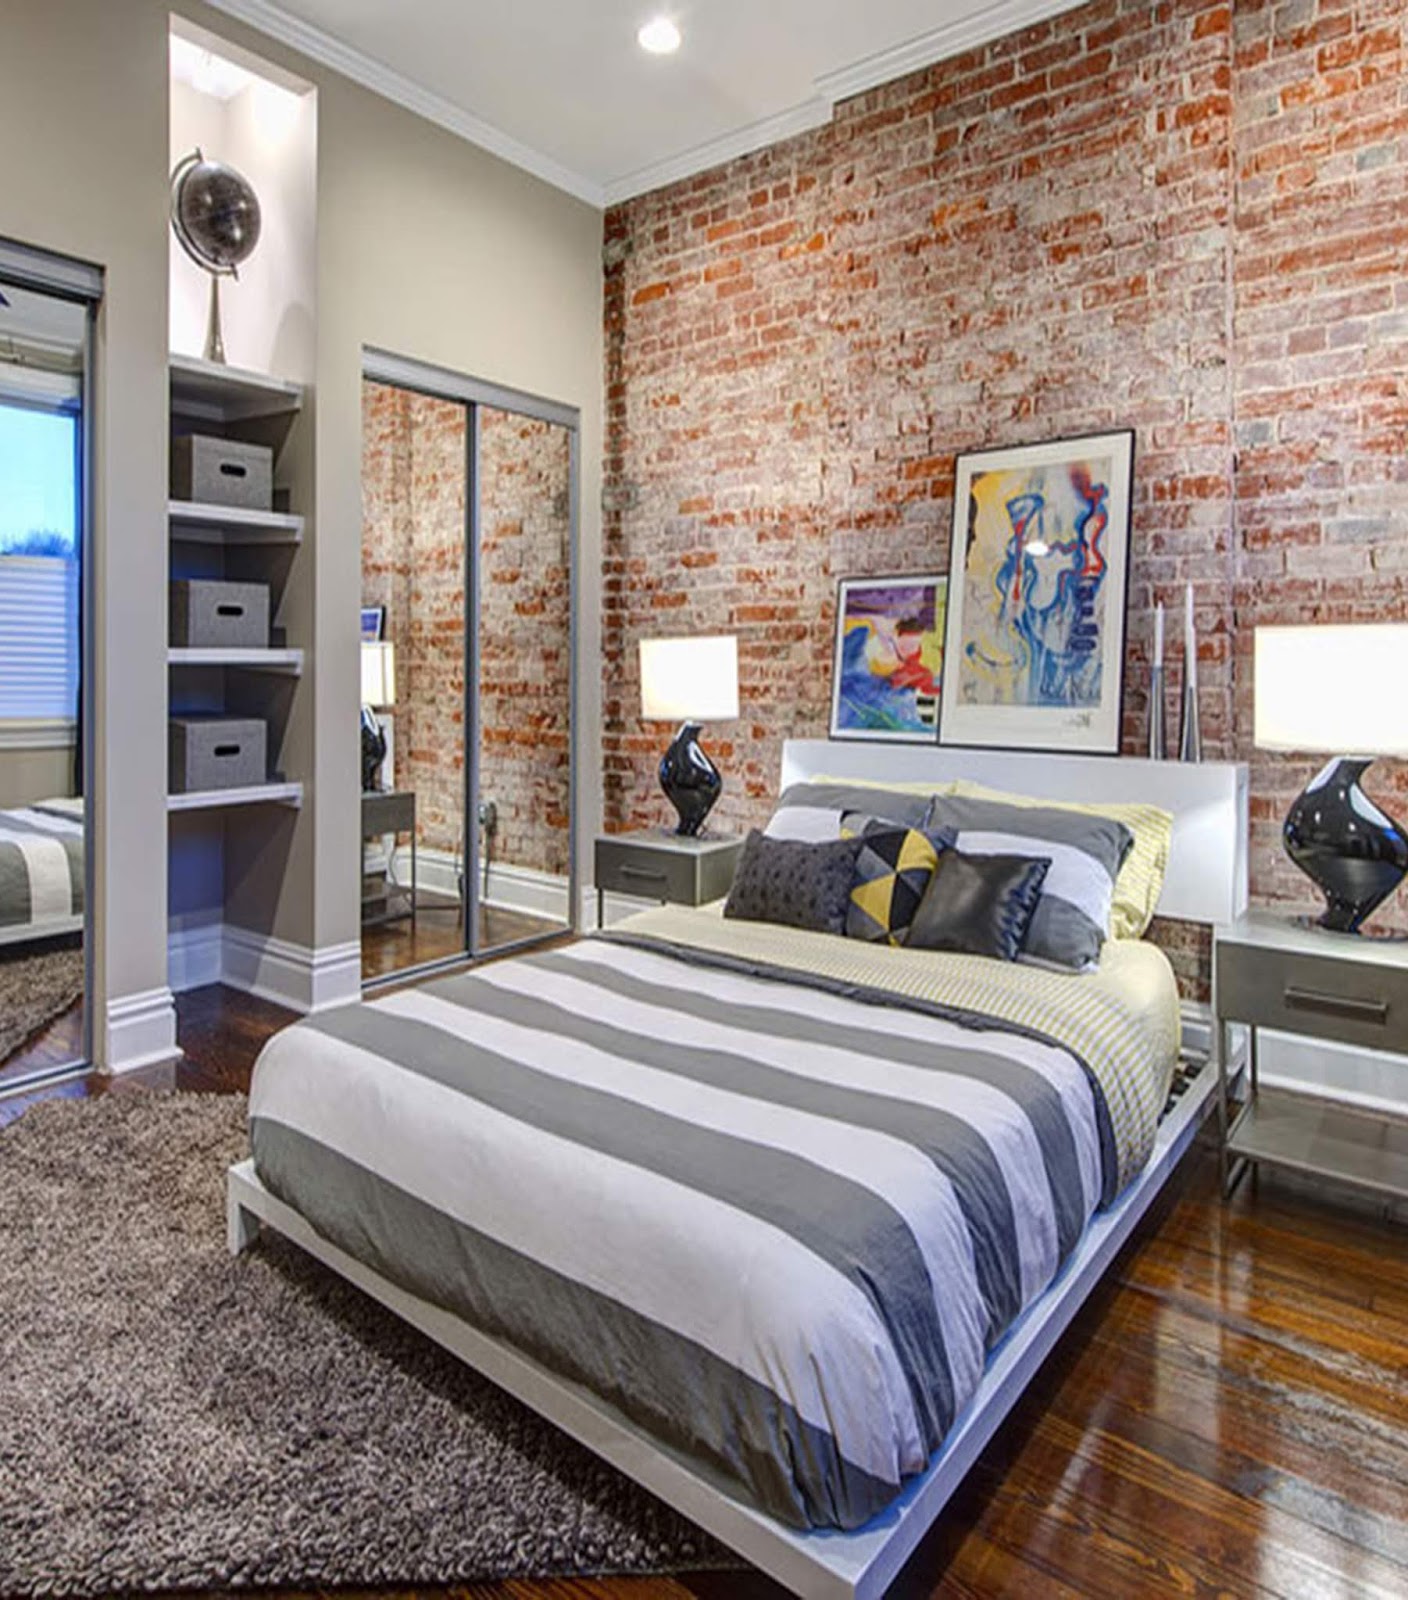 Rooms of Inspiration: Cozy Bedroom with Brick Walls